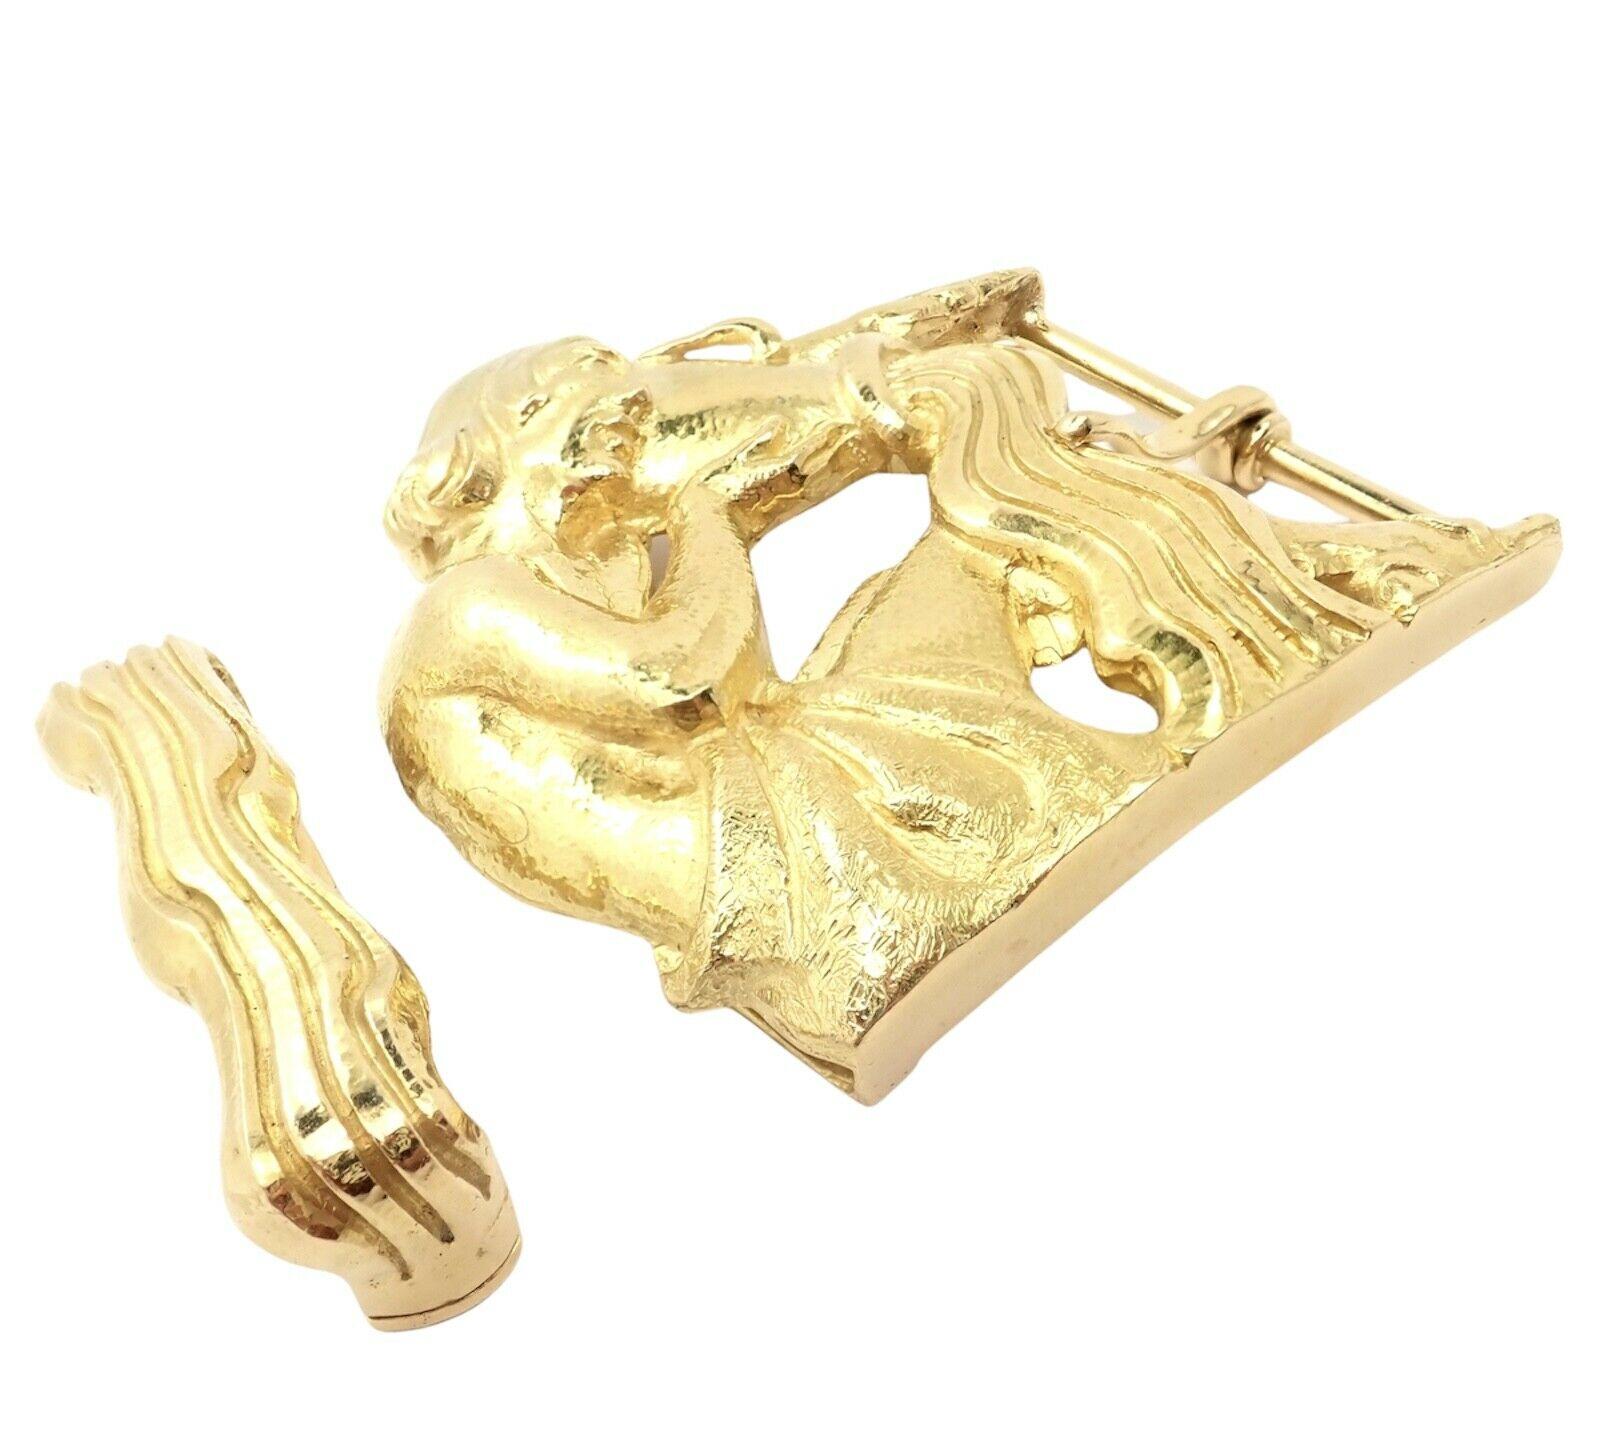 18k Yellow Gold Large Zodiac Aquarius Belt Buckle & Keeper by David Webb. 
Details: 
Weight: 75.1 grams
Measurements: Buckle: 58mm x 57mm
Belt Catch: 11mm x 44mm
Stamped Hallmarks: Webb 18k
*Free Shipping within the United States*
YOUR PRICE: